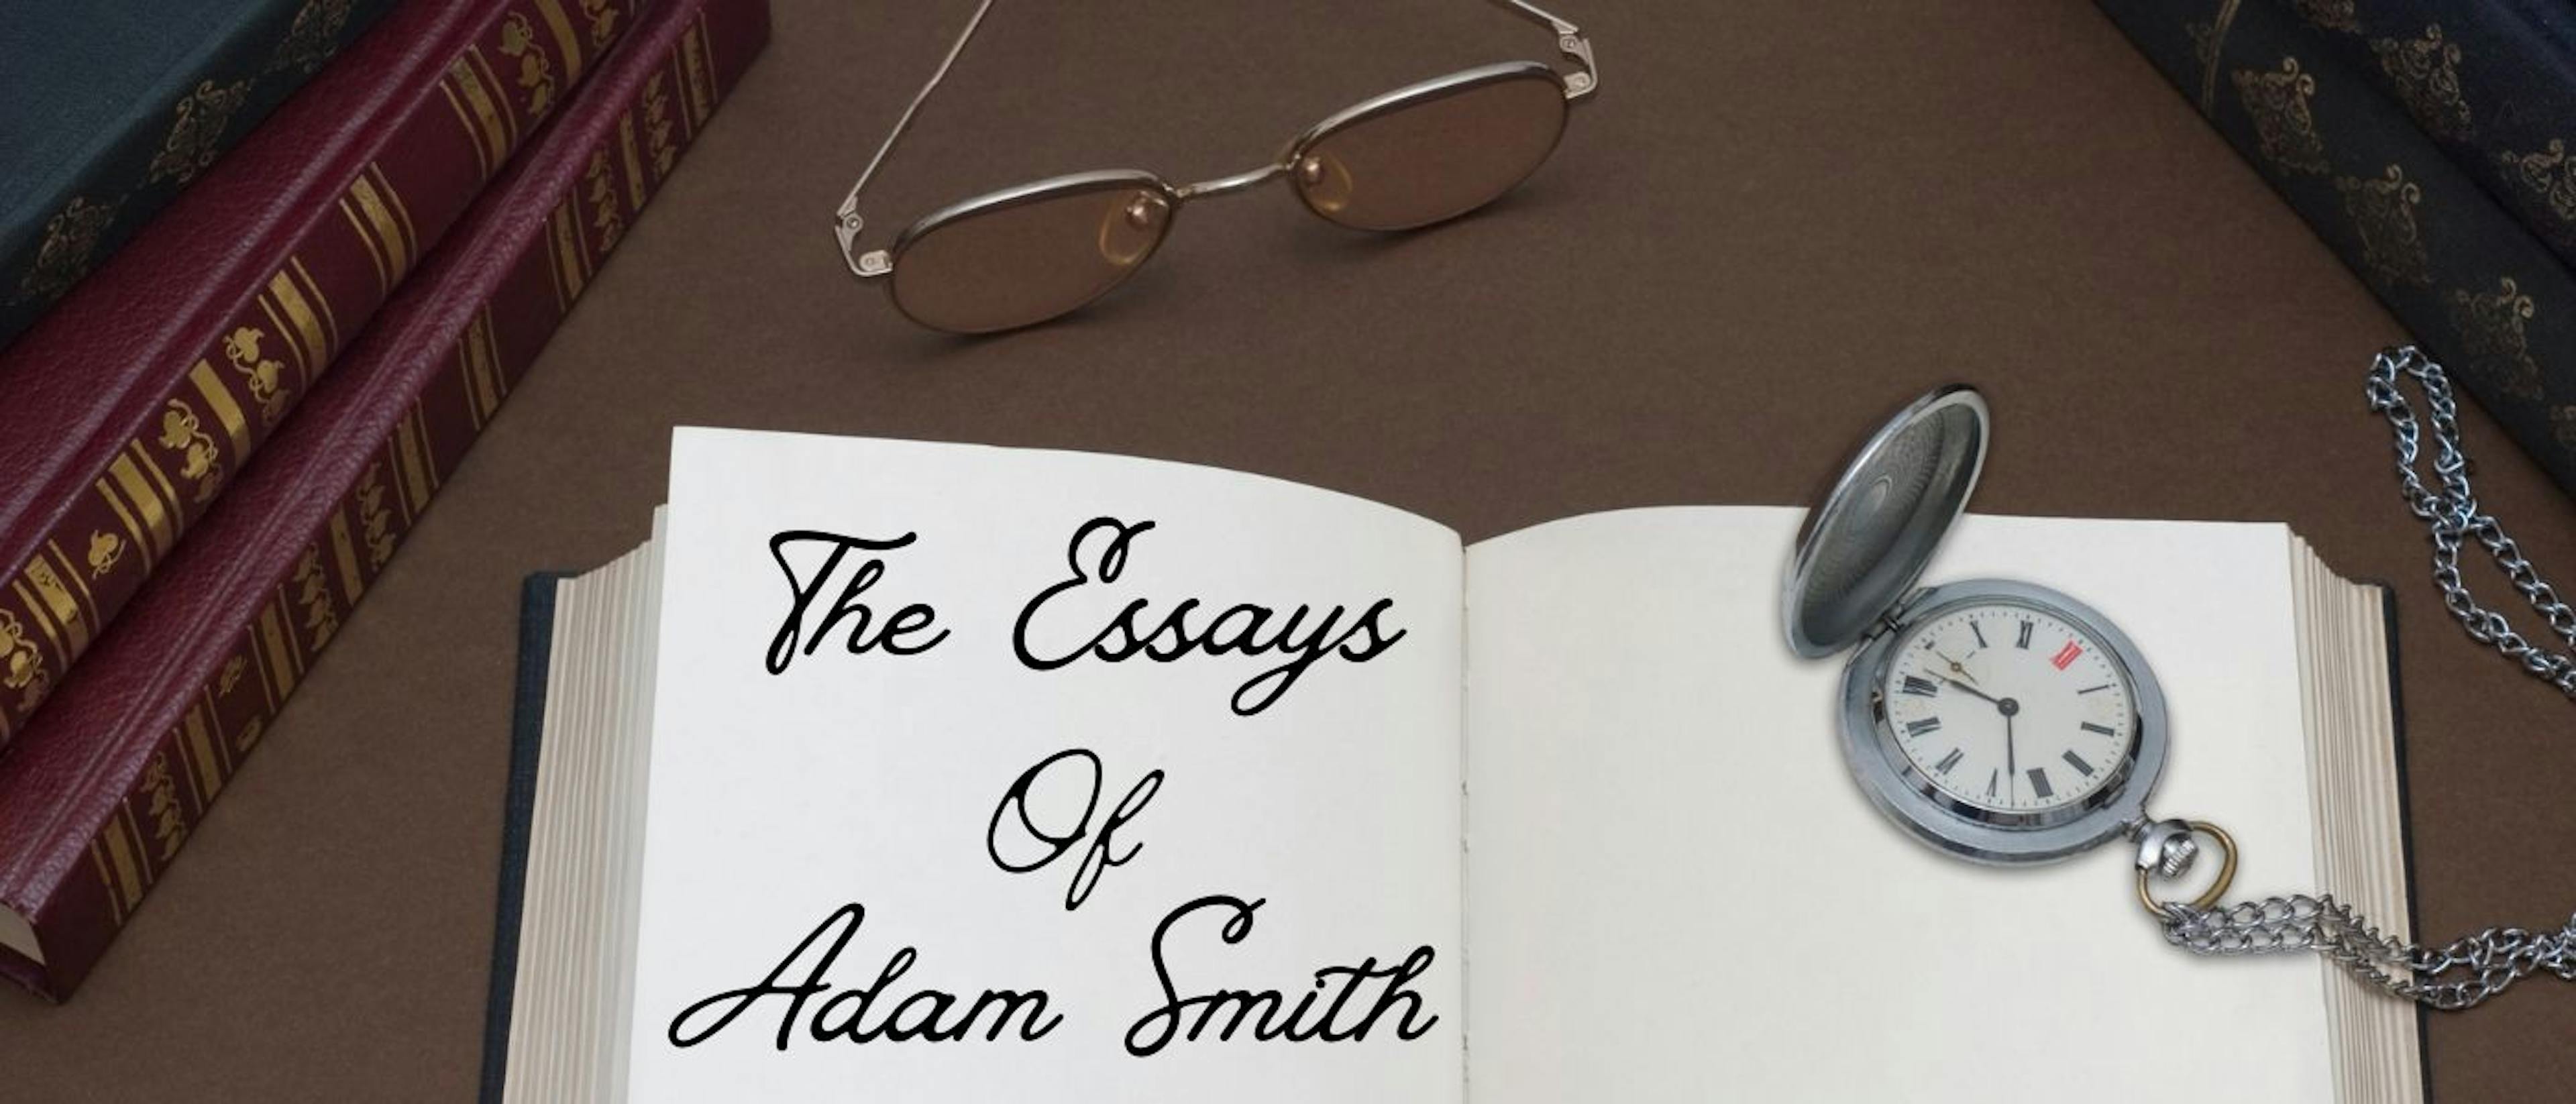 featured image - The Essays of Adam Smith: Part VI, Section II, Chapter II 